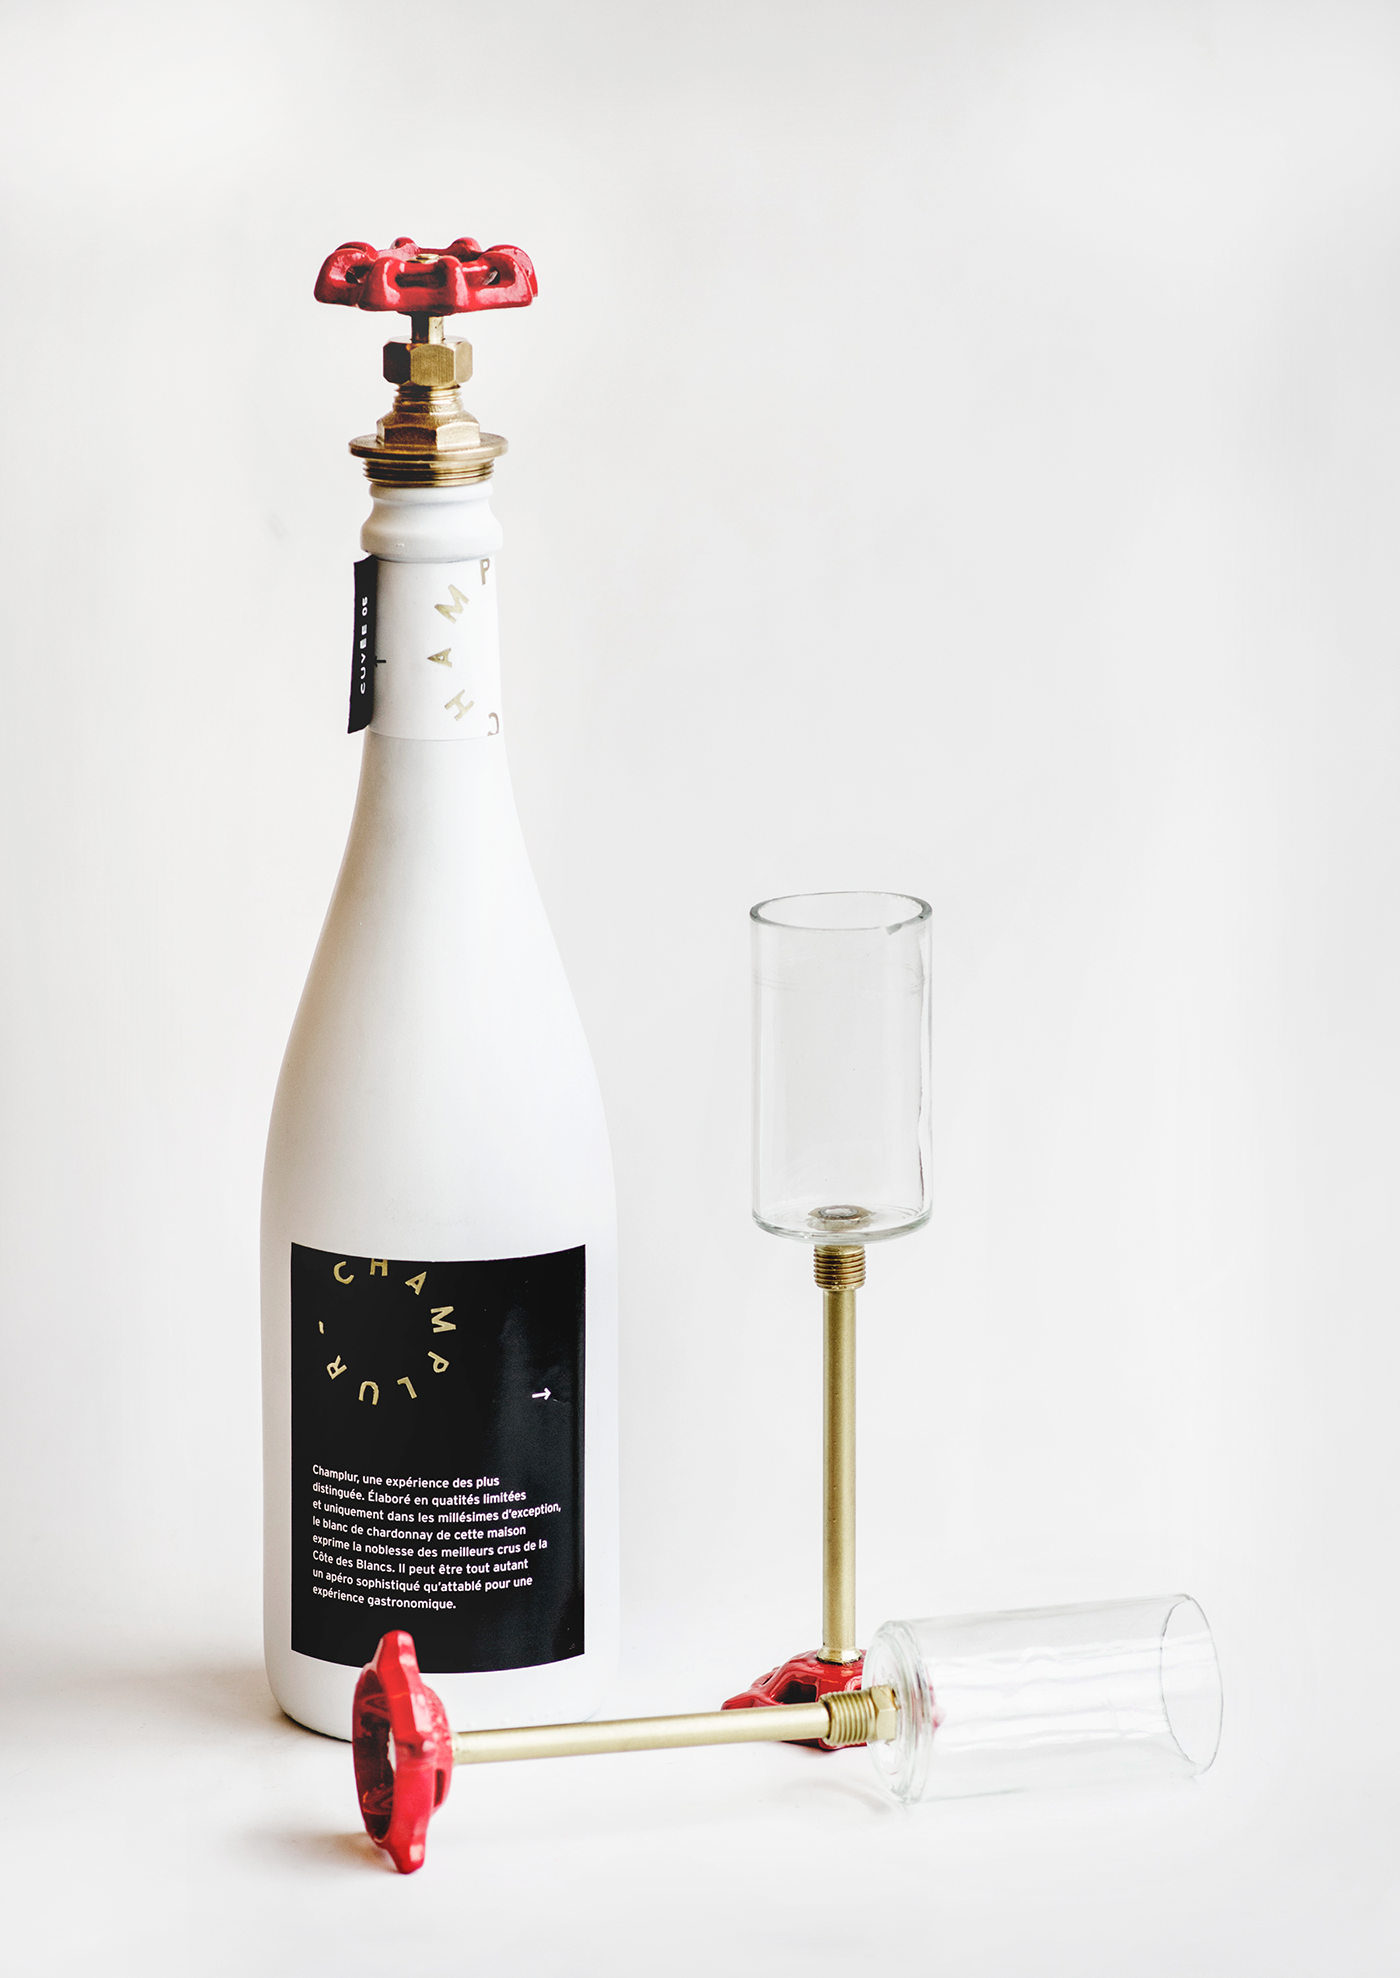 #packaging #Champagne alcool alcohol bottle champlur gold emballage produit Goulot Or luxury luxe glass flute